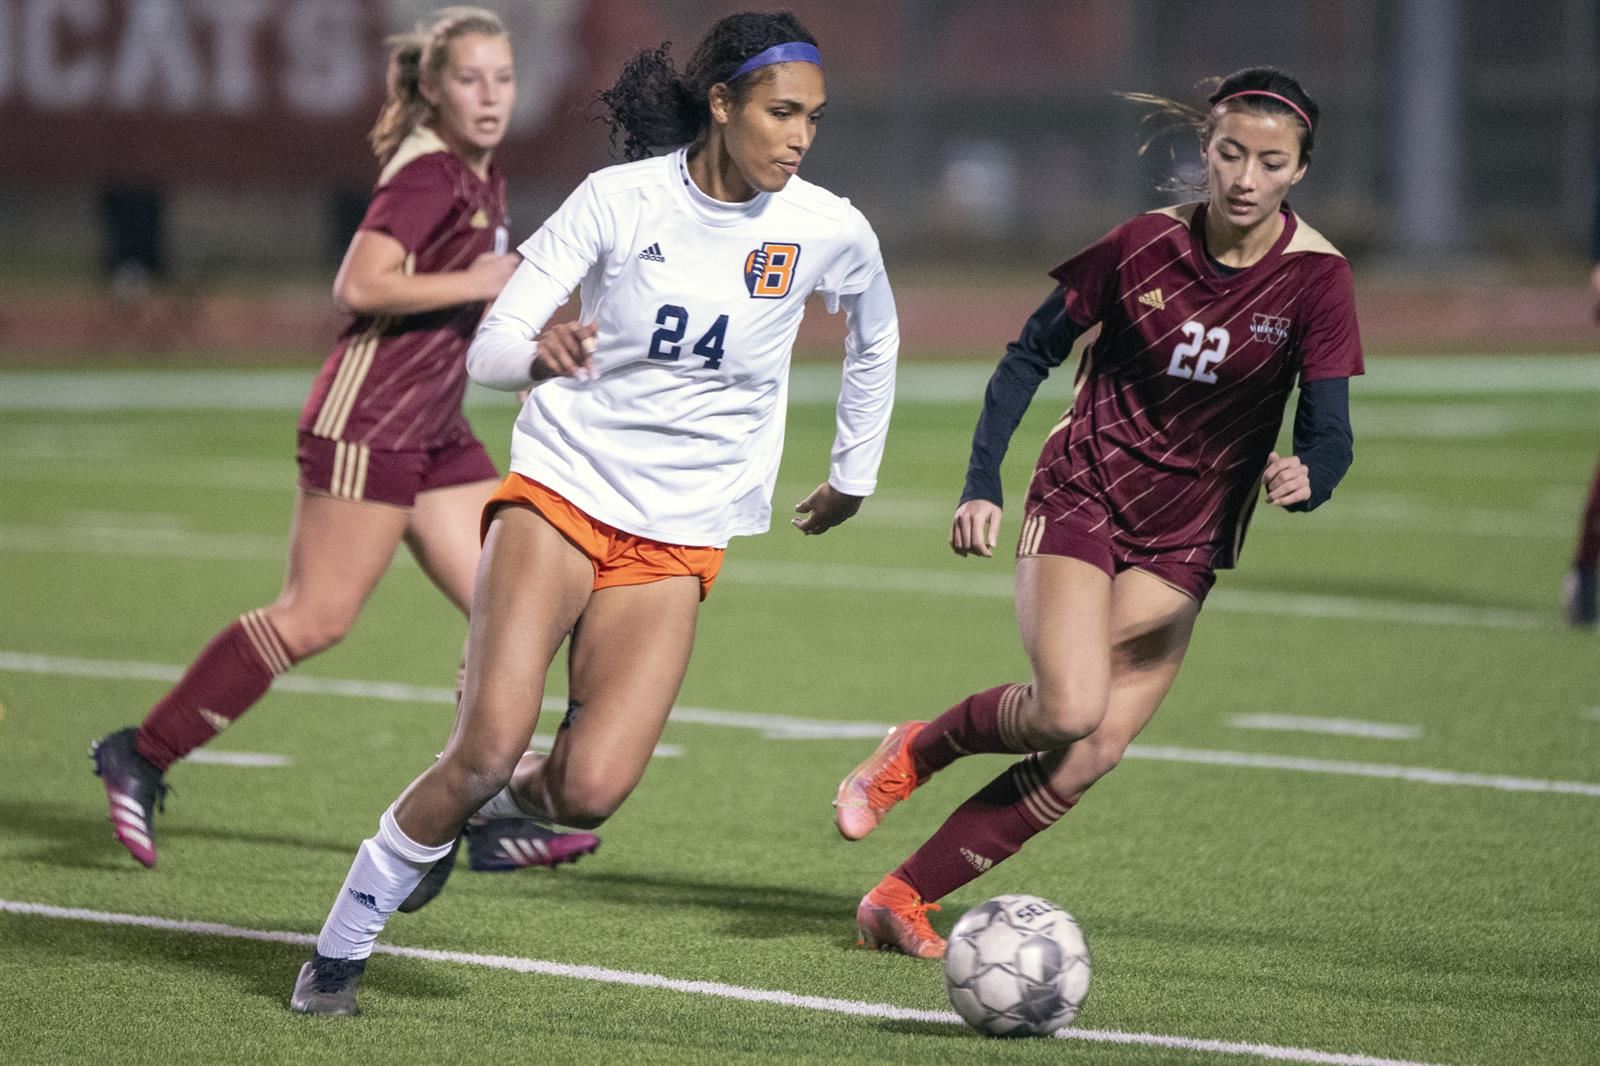 Bridgeland High School sophomore Anaiyah Robinson (No. 24) was voted District 16-6A’s Offensive Most Valuable Player.